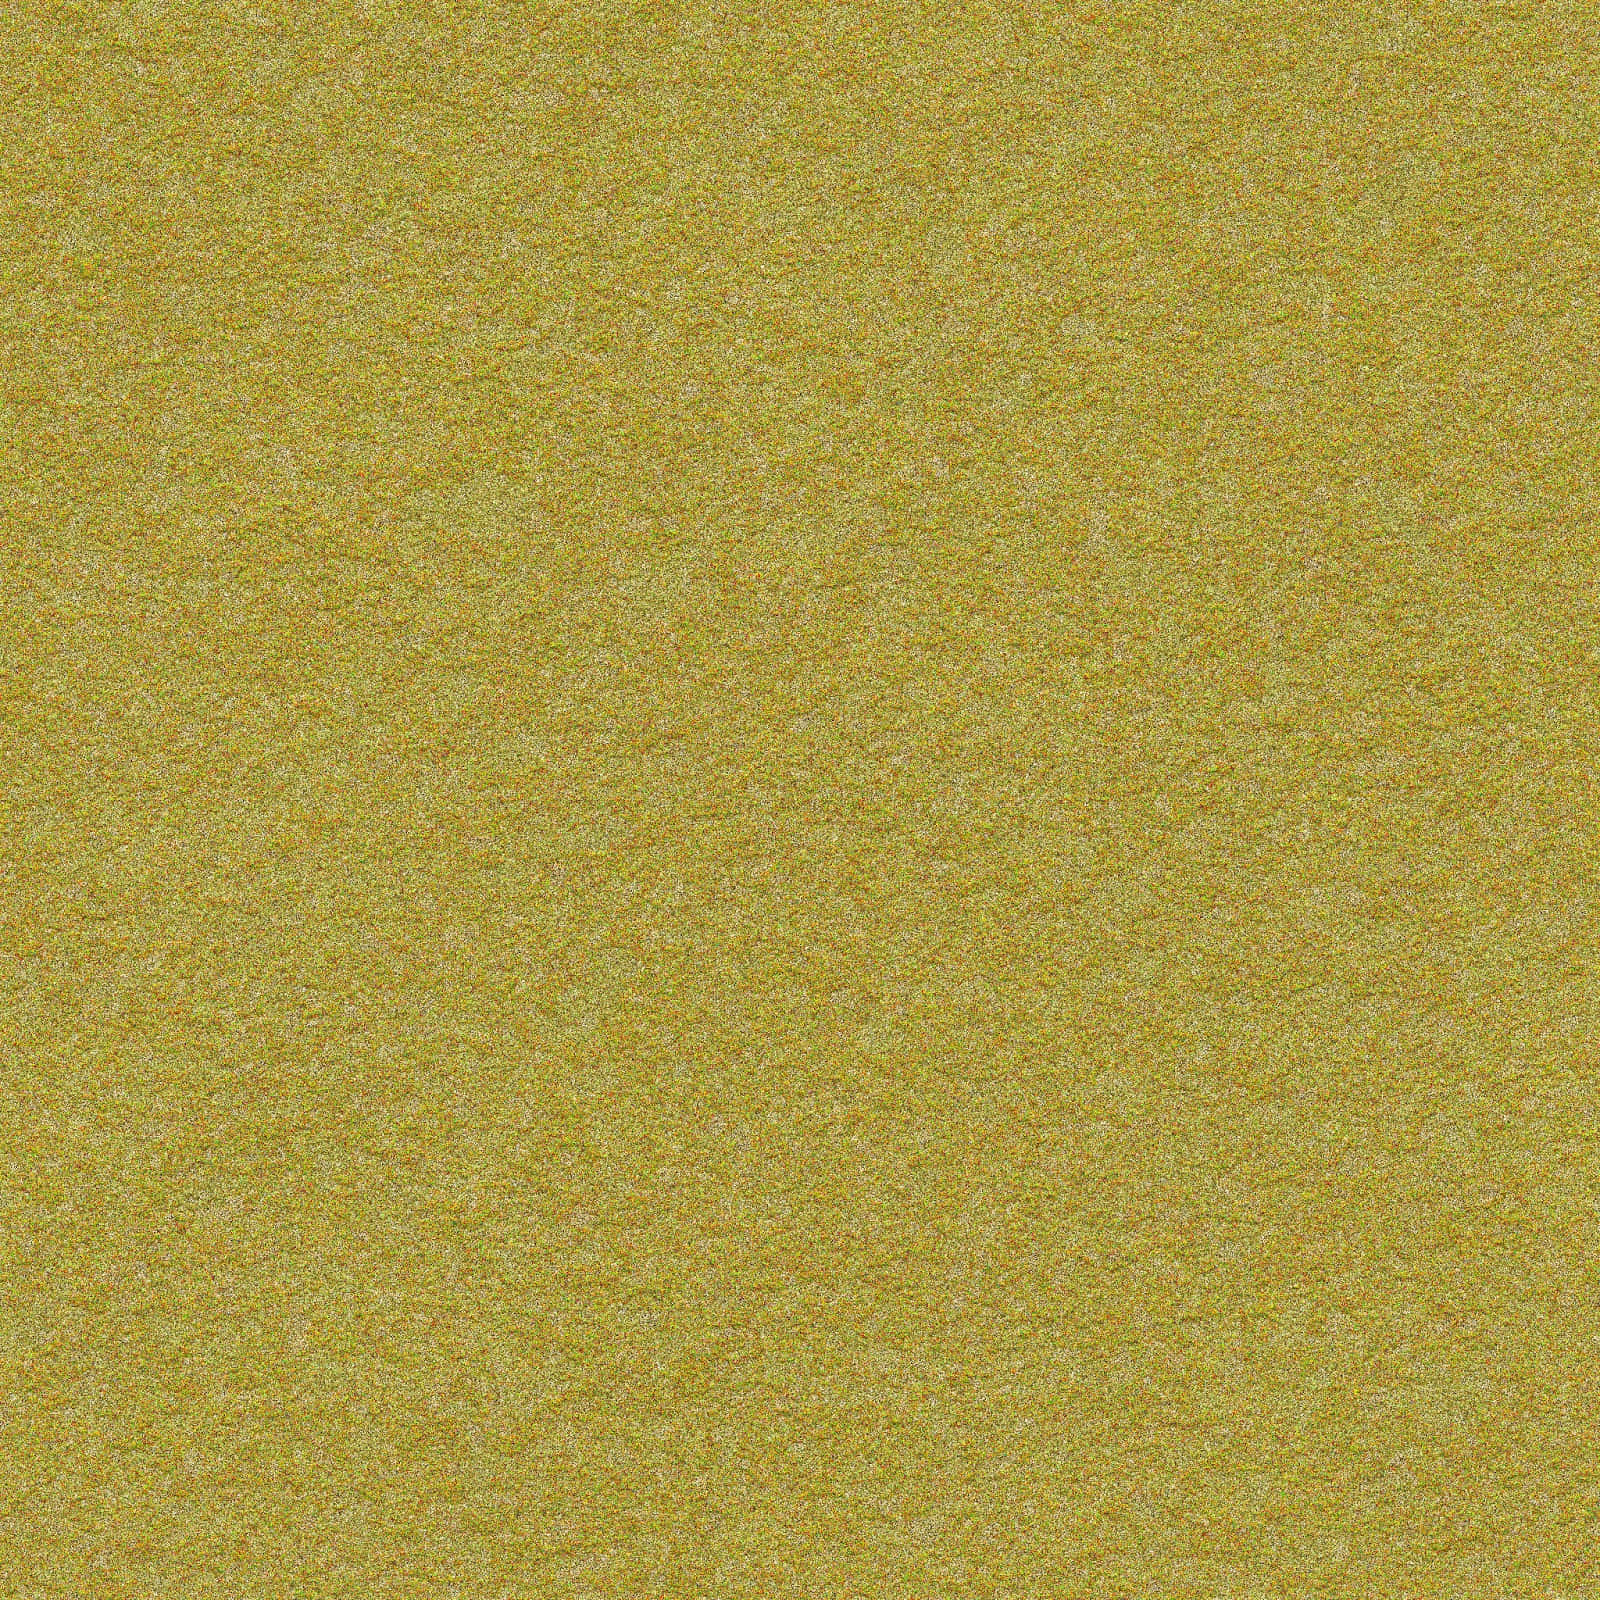 Textures For Photoshop Card Wallpaper